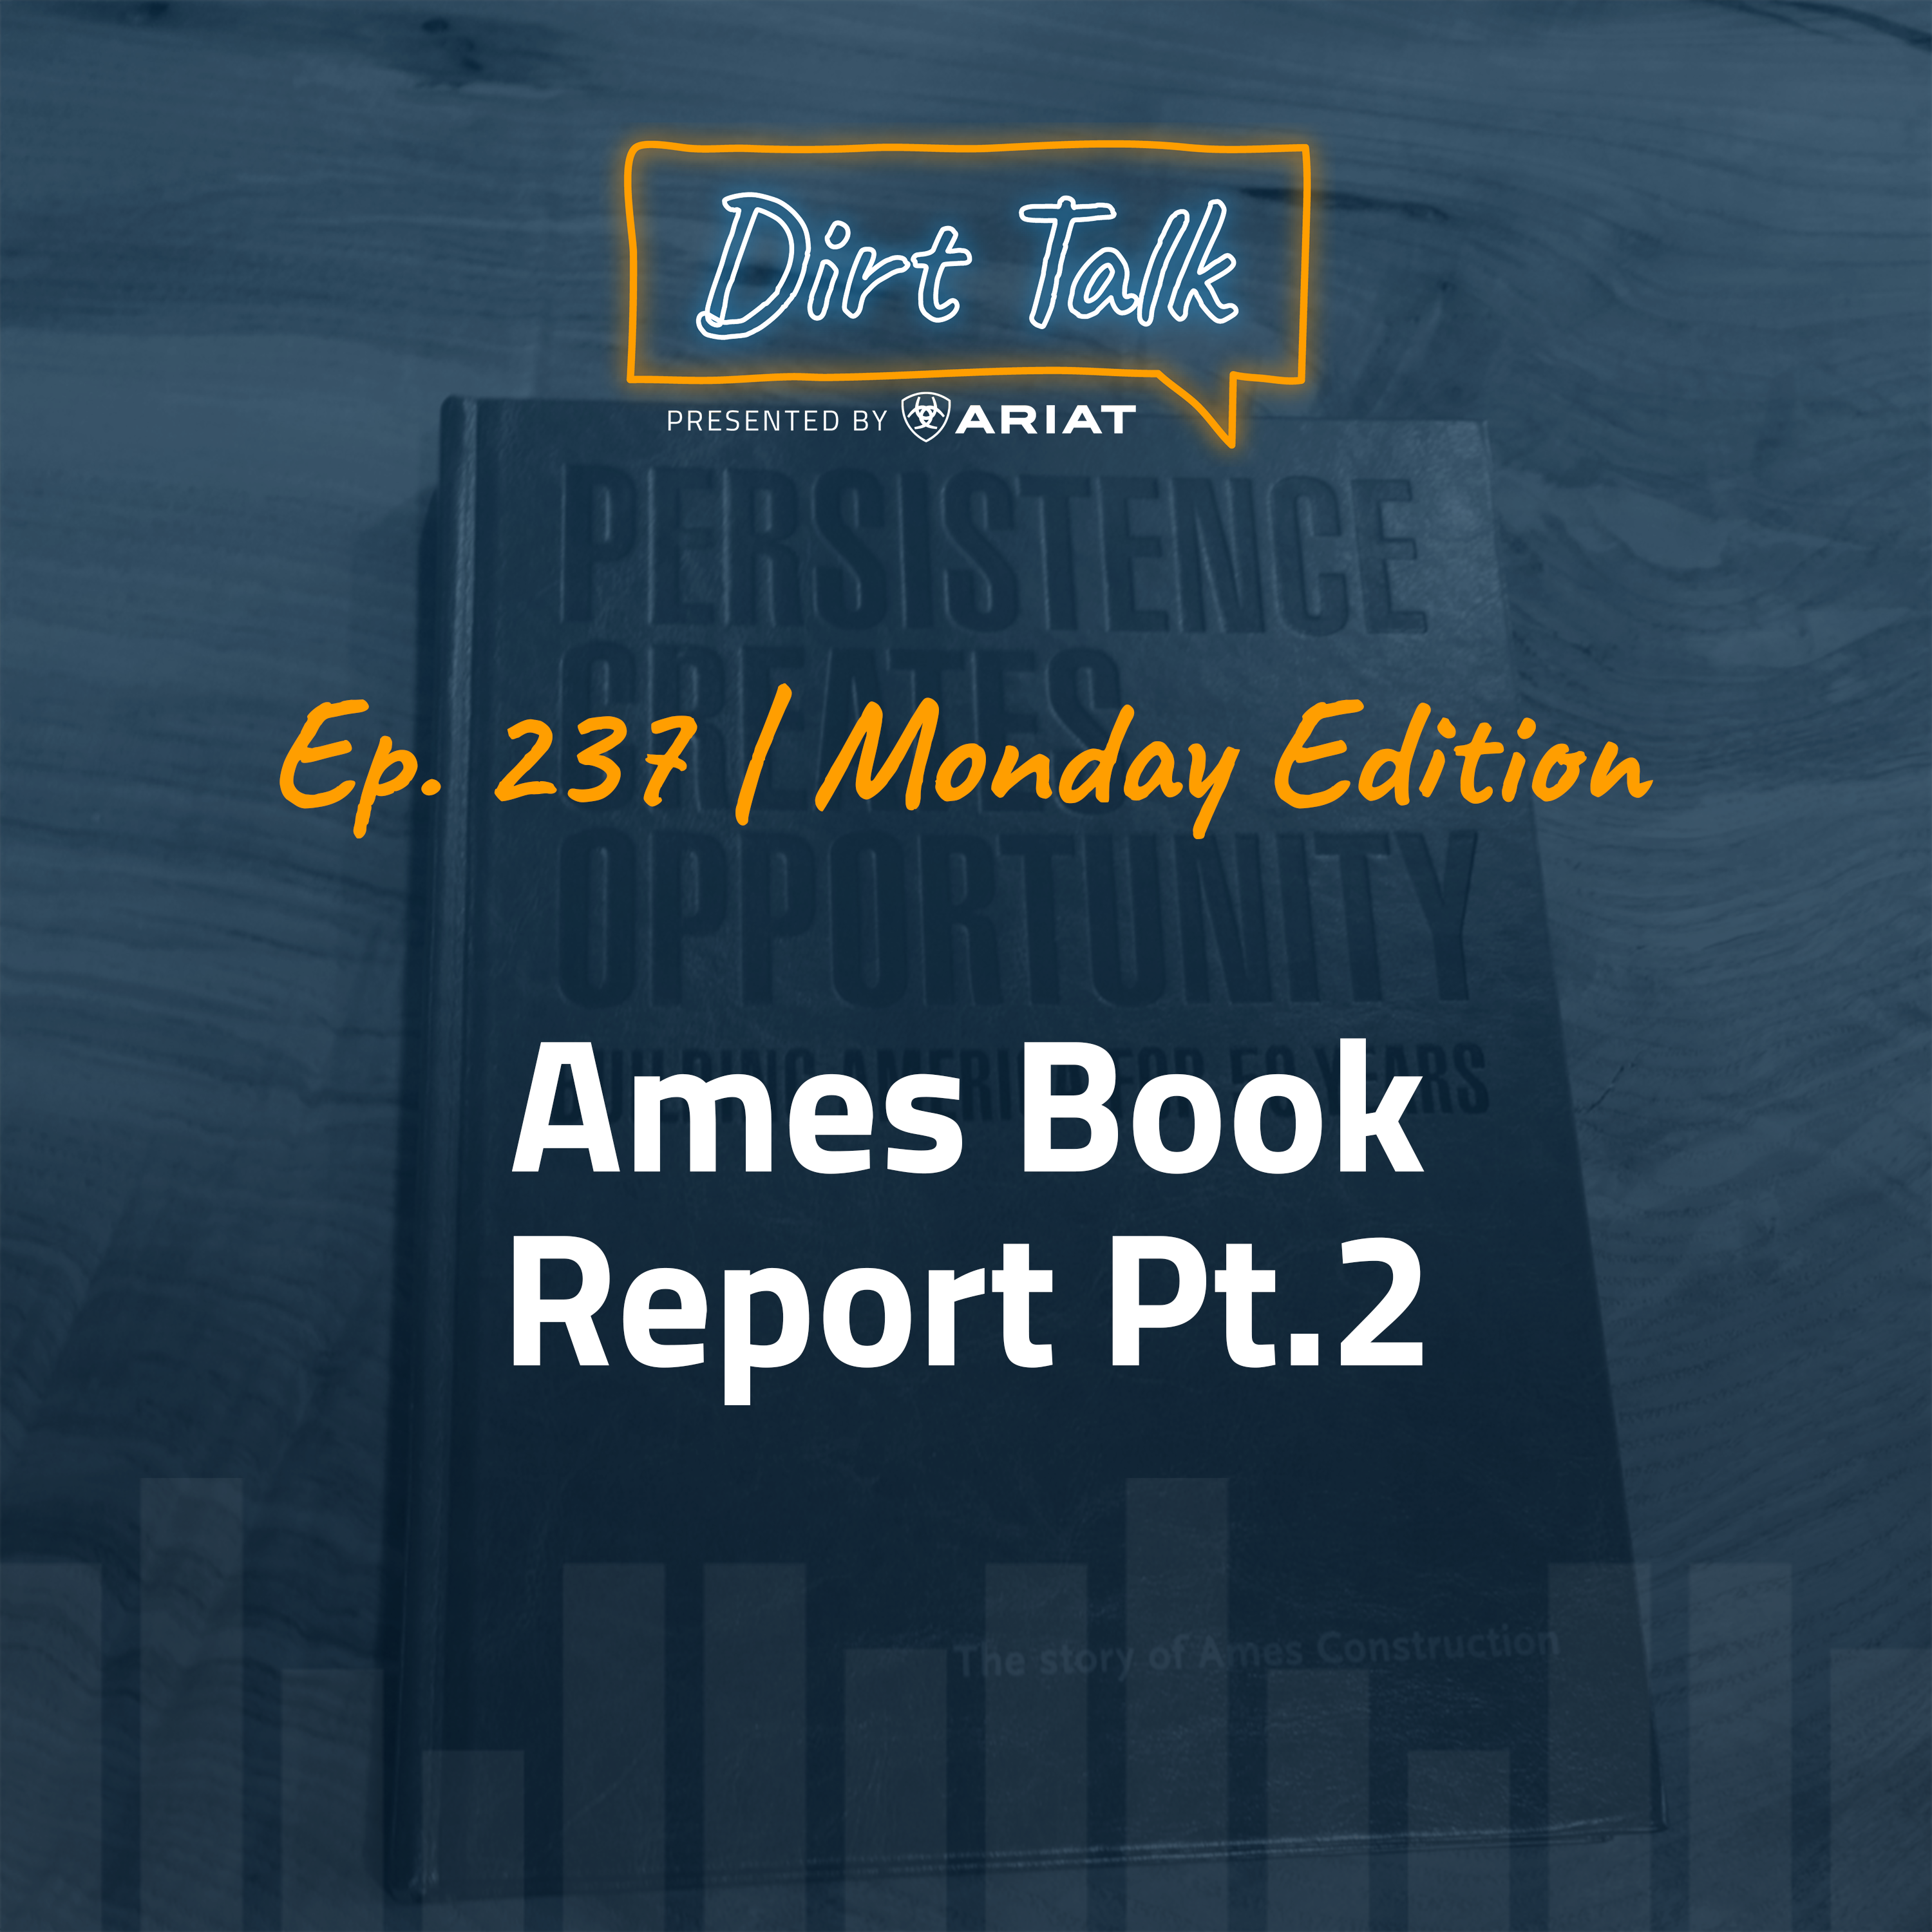 Monday Book Report The Story of Ames Continued